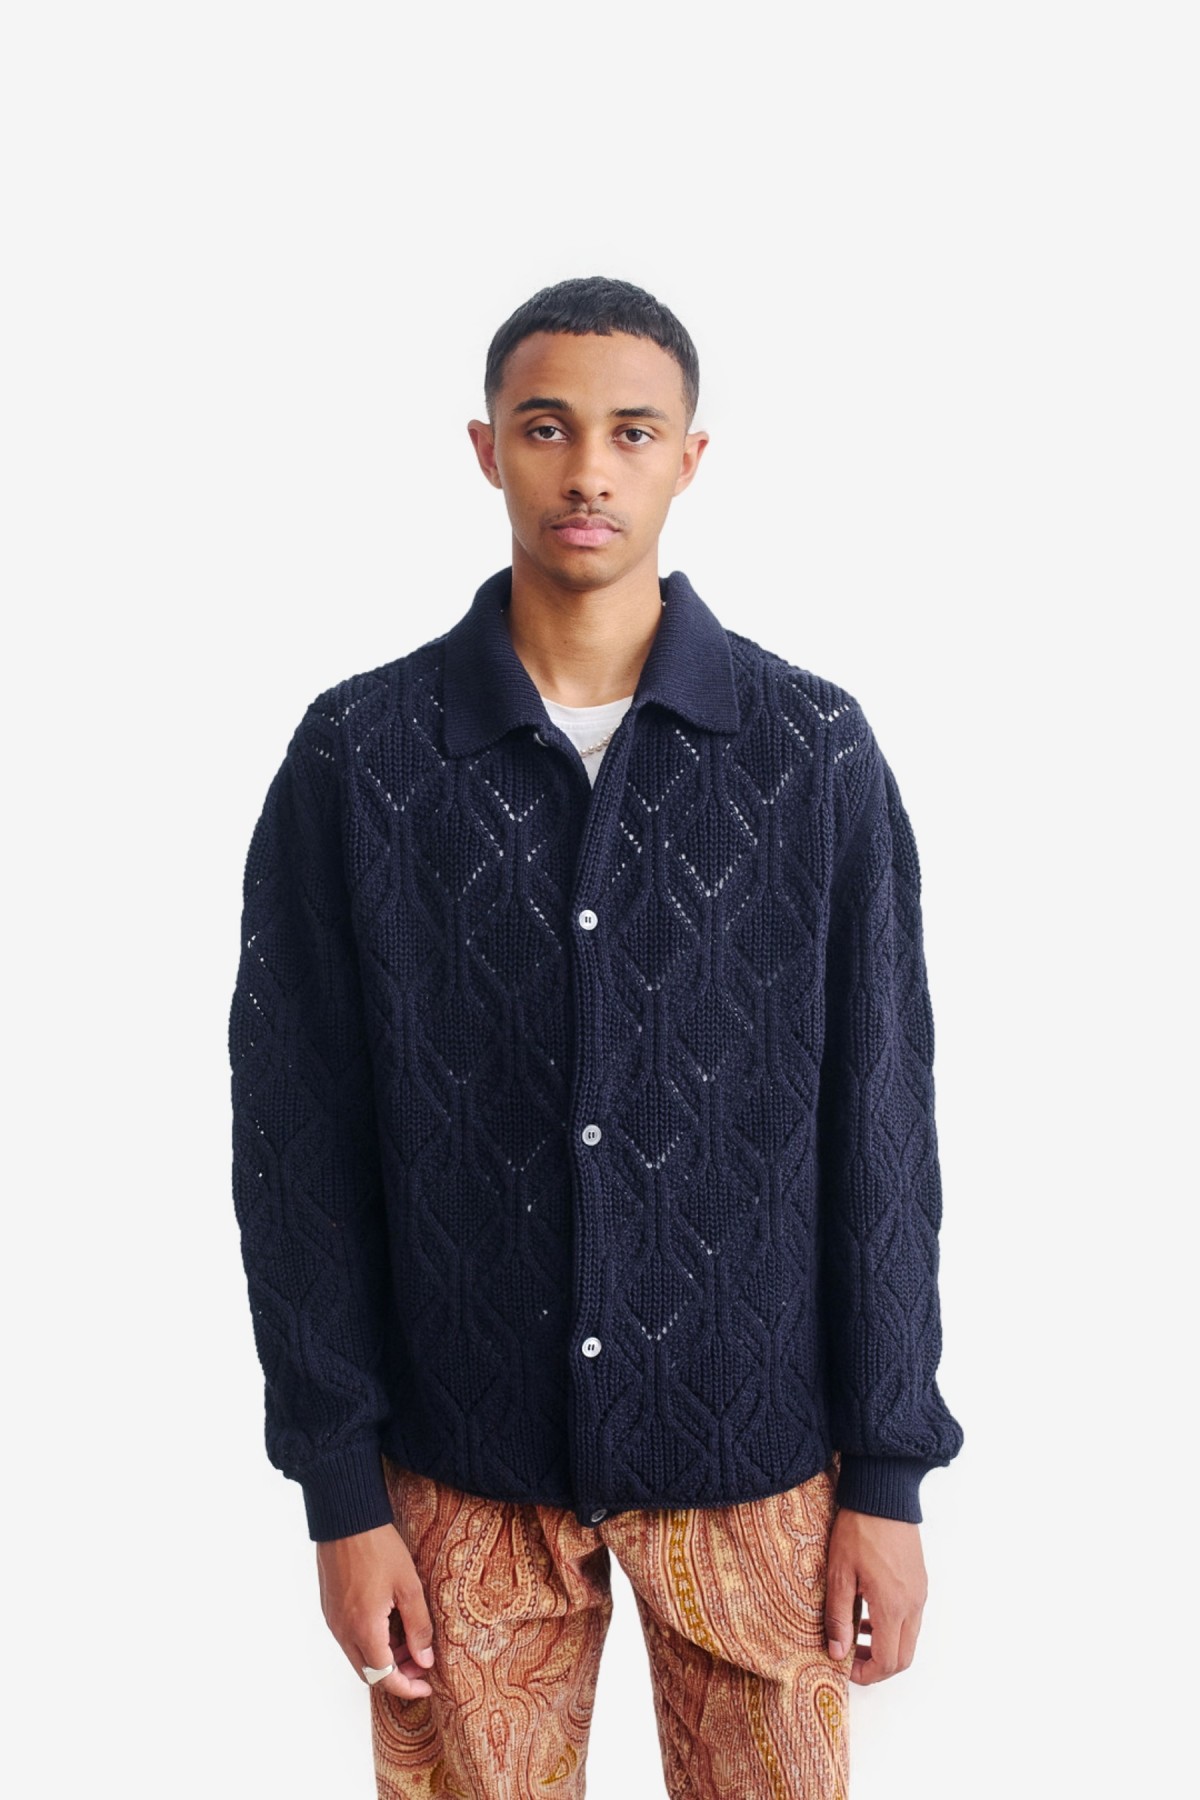 A Kind of Guise Per Knit Polo Jacket in Midnight Navy